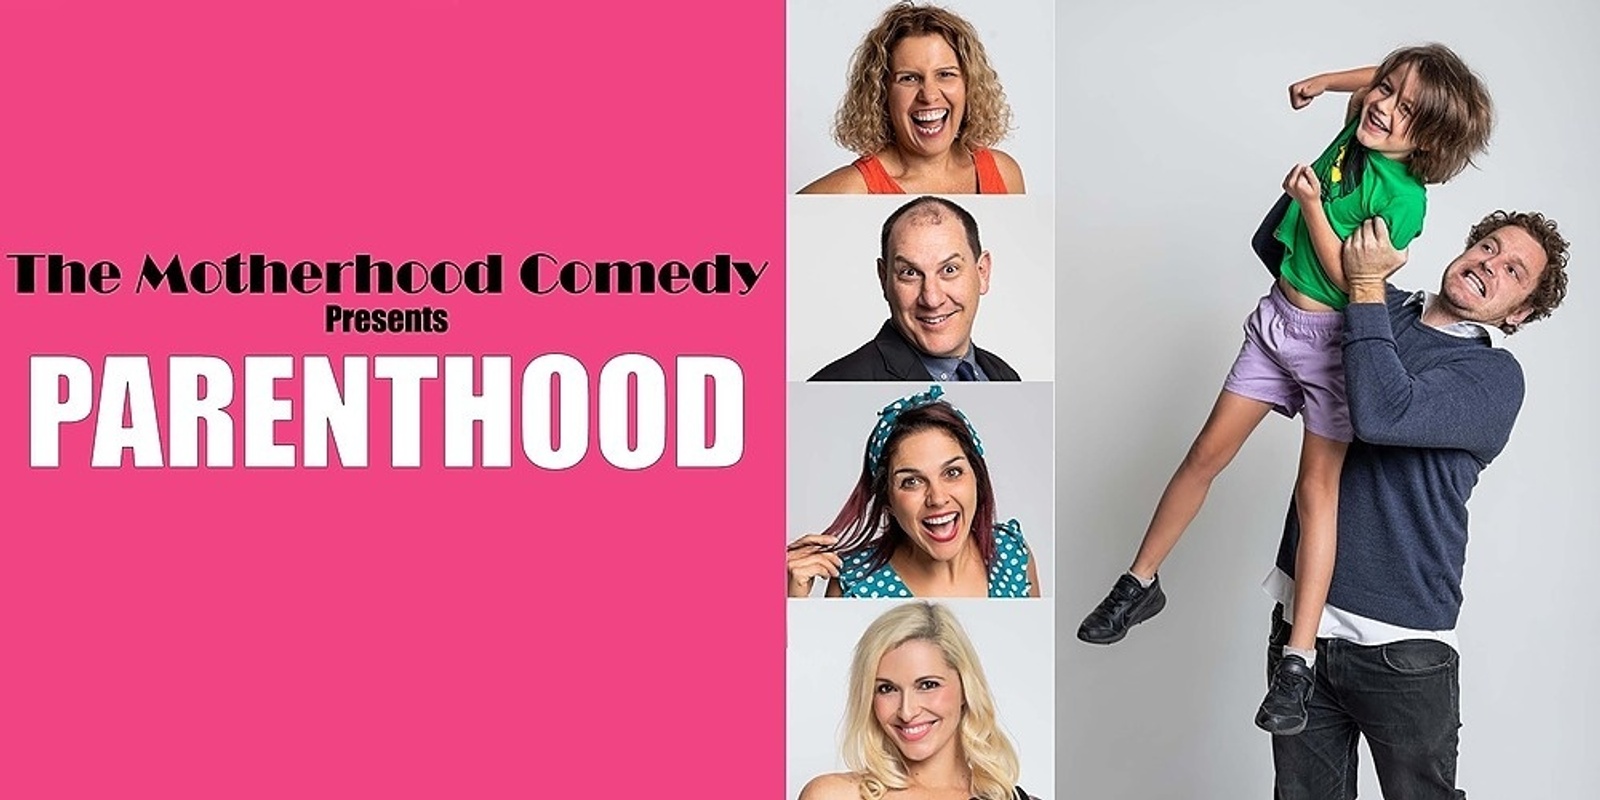 Banner image for 'Parenthood' presented by The Motherhood Comedy